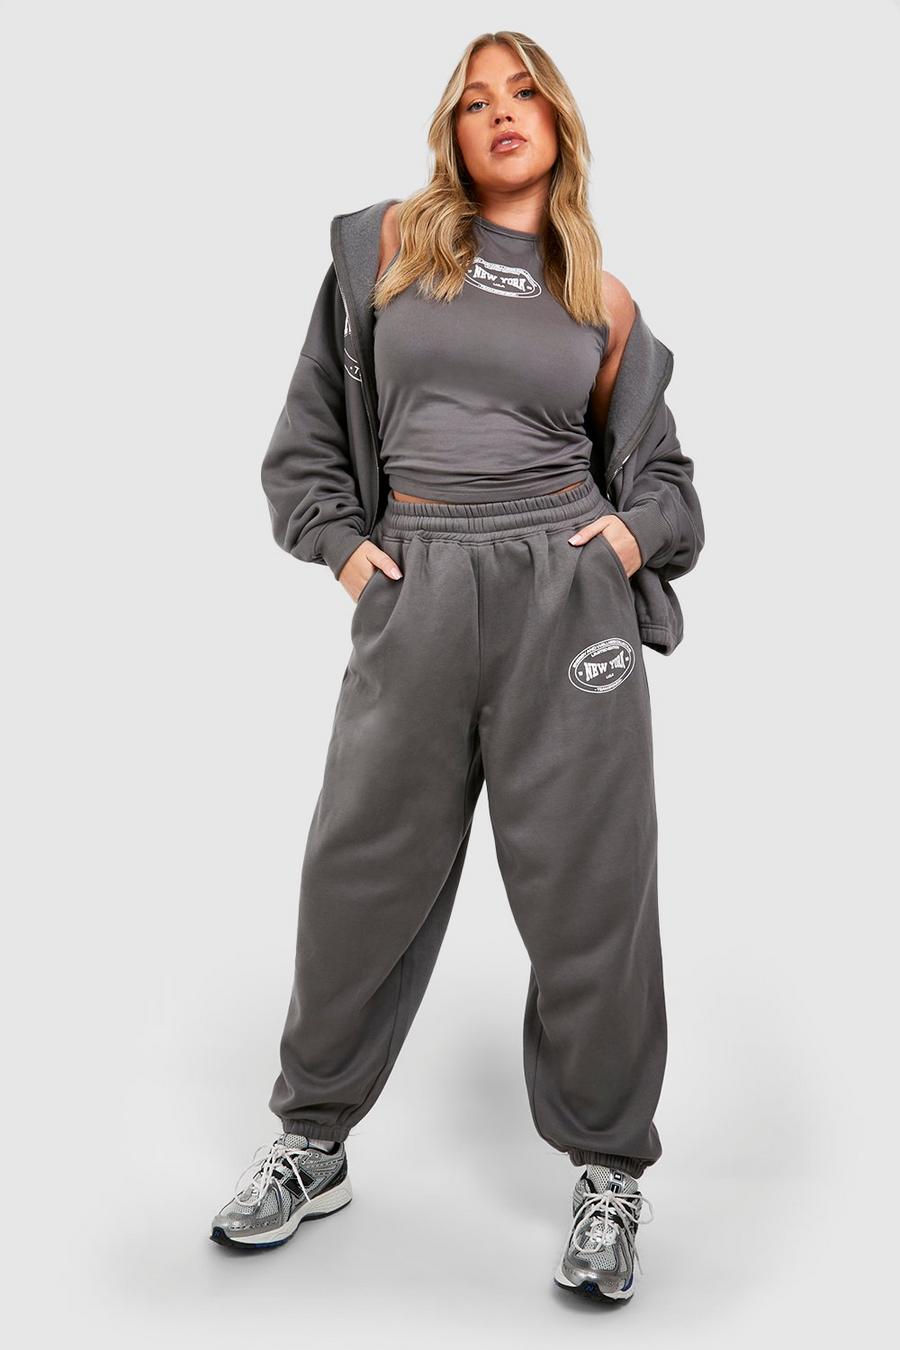 Charcoal gris Plus New York Oversized Jogger